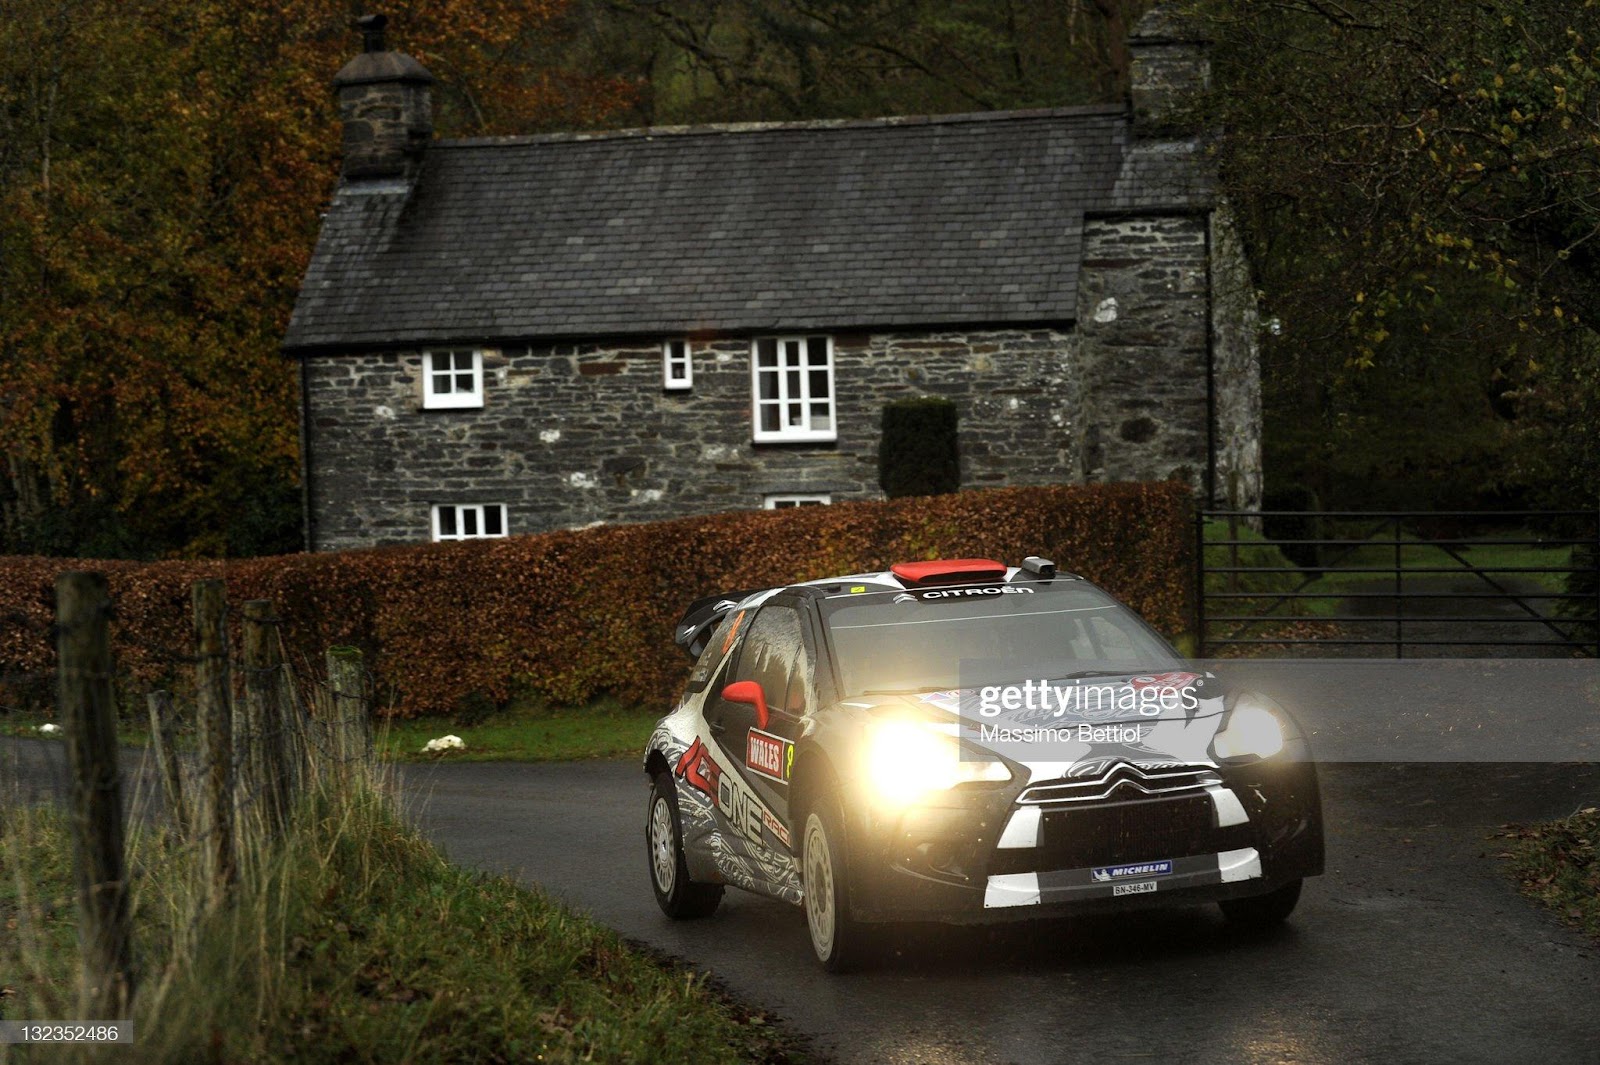 Kimi Raikkonen of Finland and Kaj Lindstrom of Finland compete in their Ice 1 Racing WRT Citroen DS3 WRC during day 1 of the WRC Wales Rally GB on November 11, 2011 in Cardiff, United Kingdom.